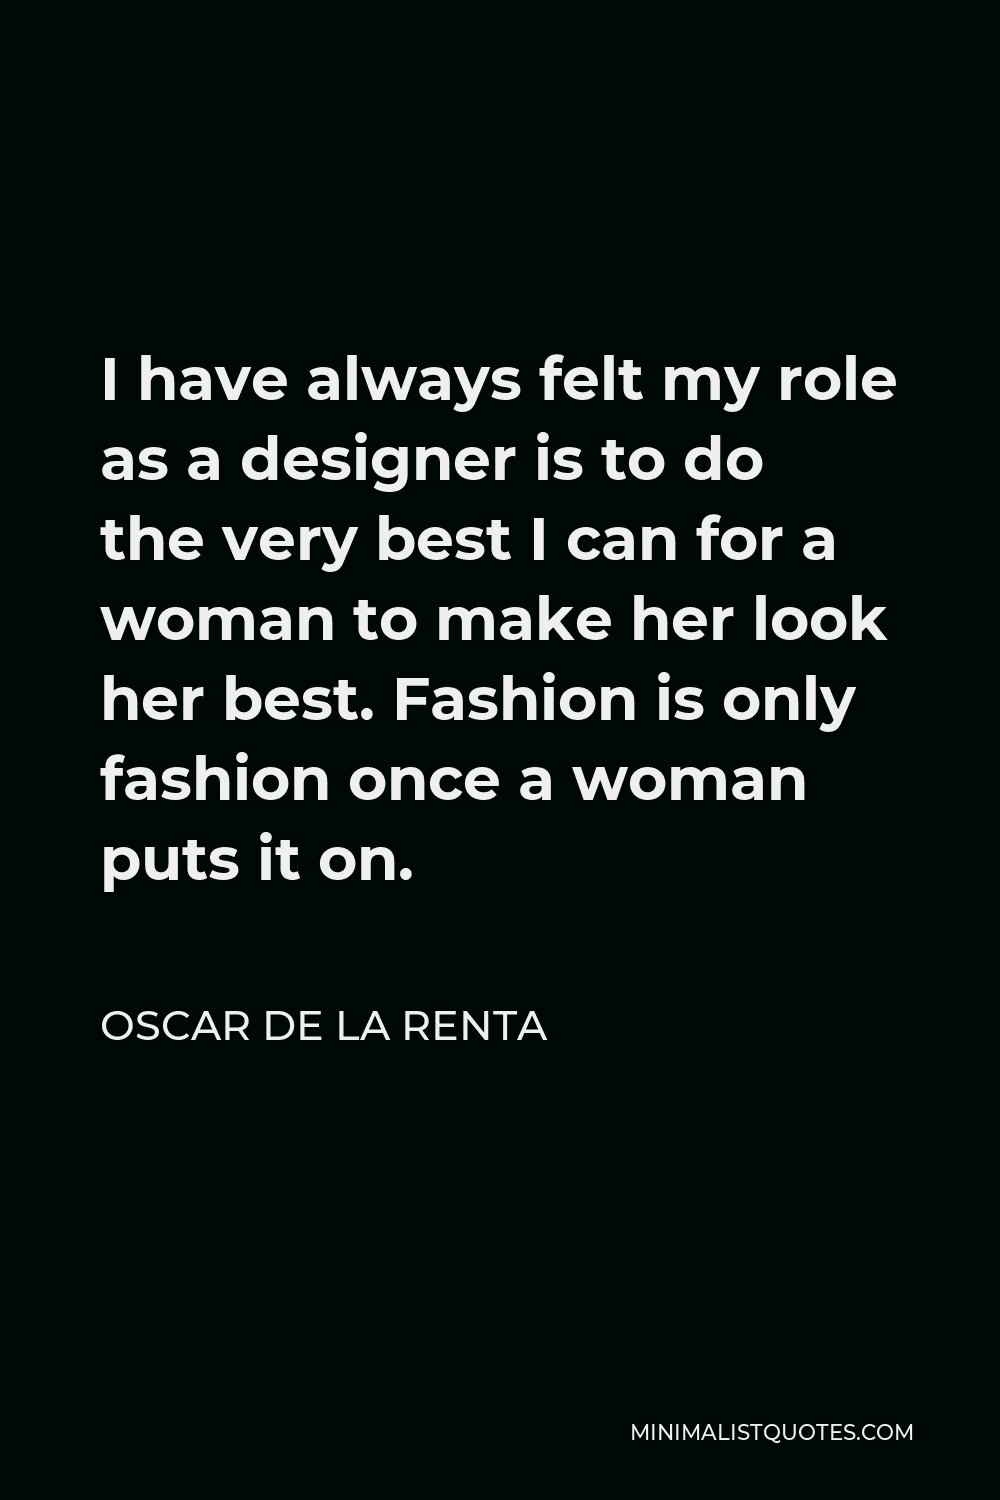 Oscar de la Renta Quote - I have always felt my role as a designer is to do the very best I can for a woman to make her look her best. Fashion is only fashion once a woman puts it on.